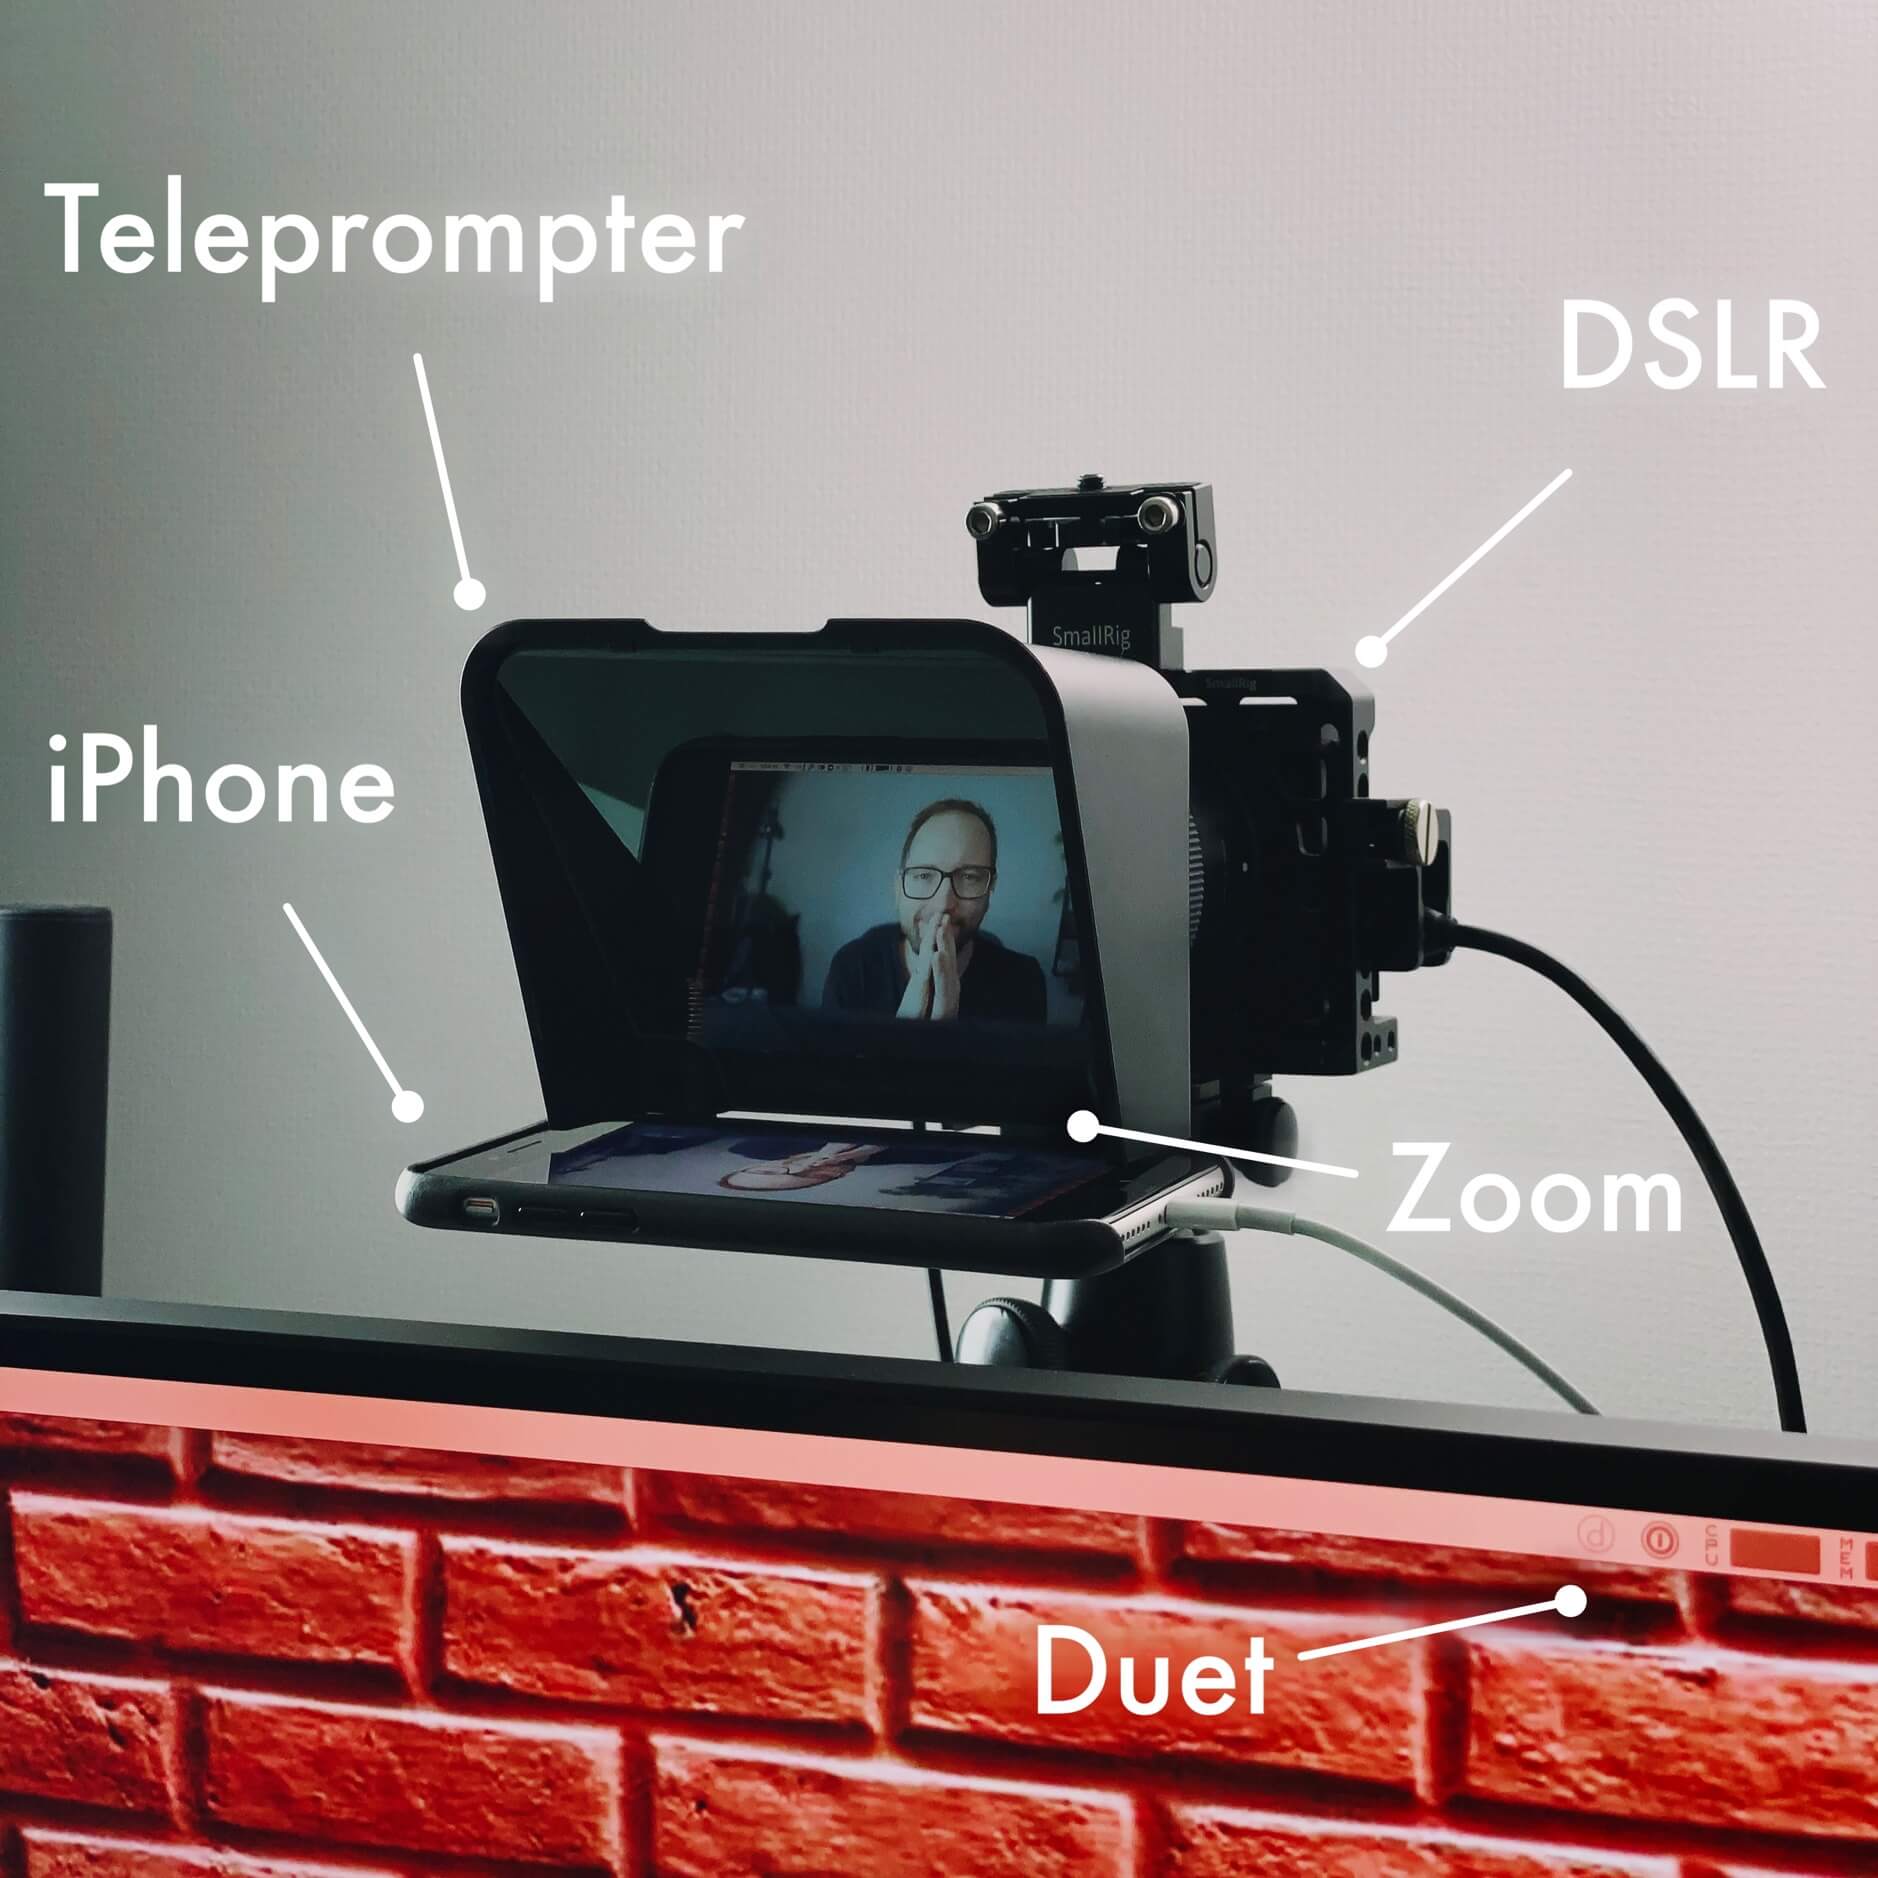 teleprompter software for windows 10